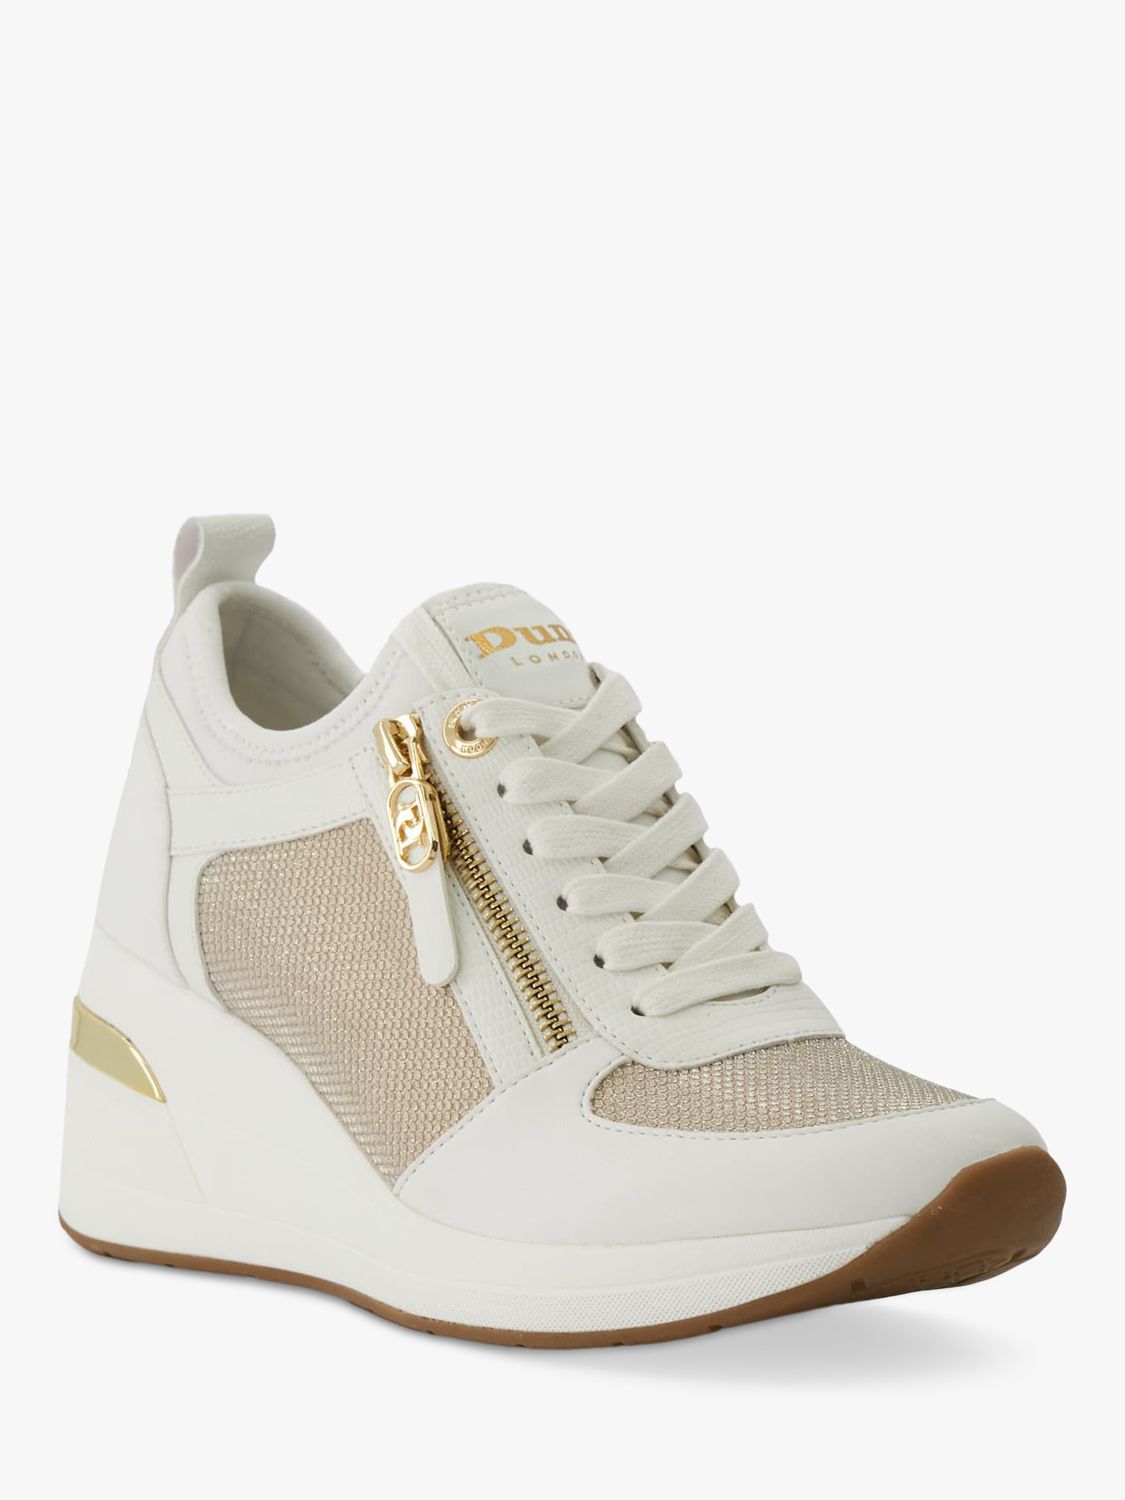 Dune Eiline Leather Mix Lace Up Wedge Trainers, Gold at John Lewis ...